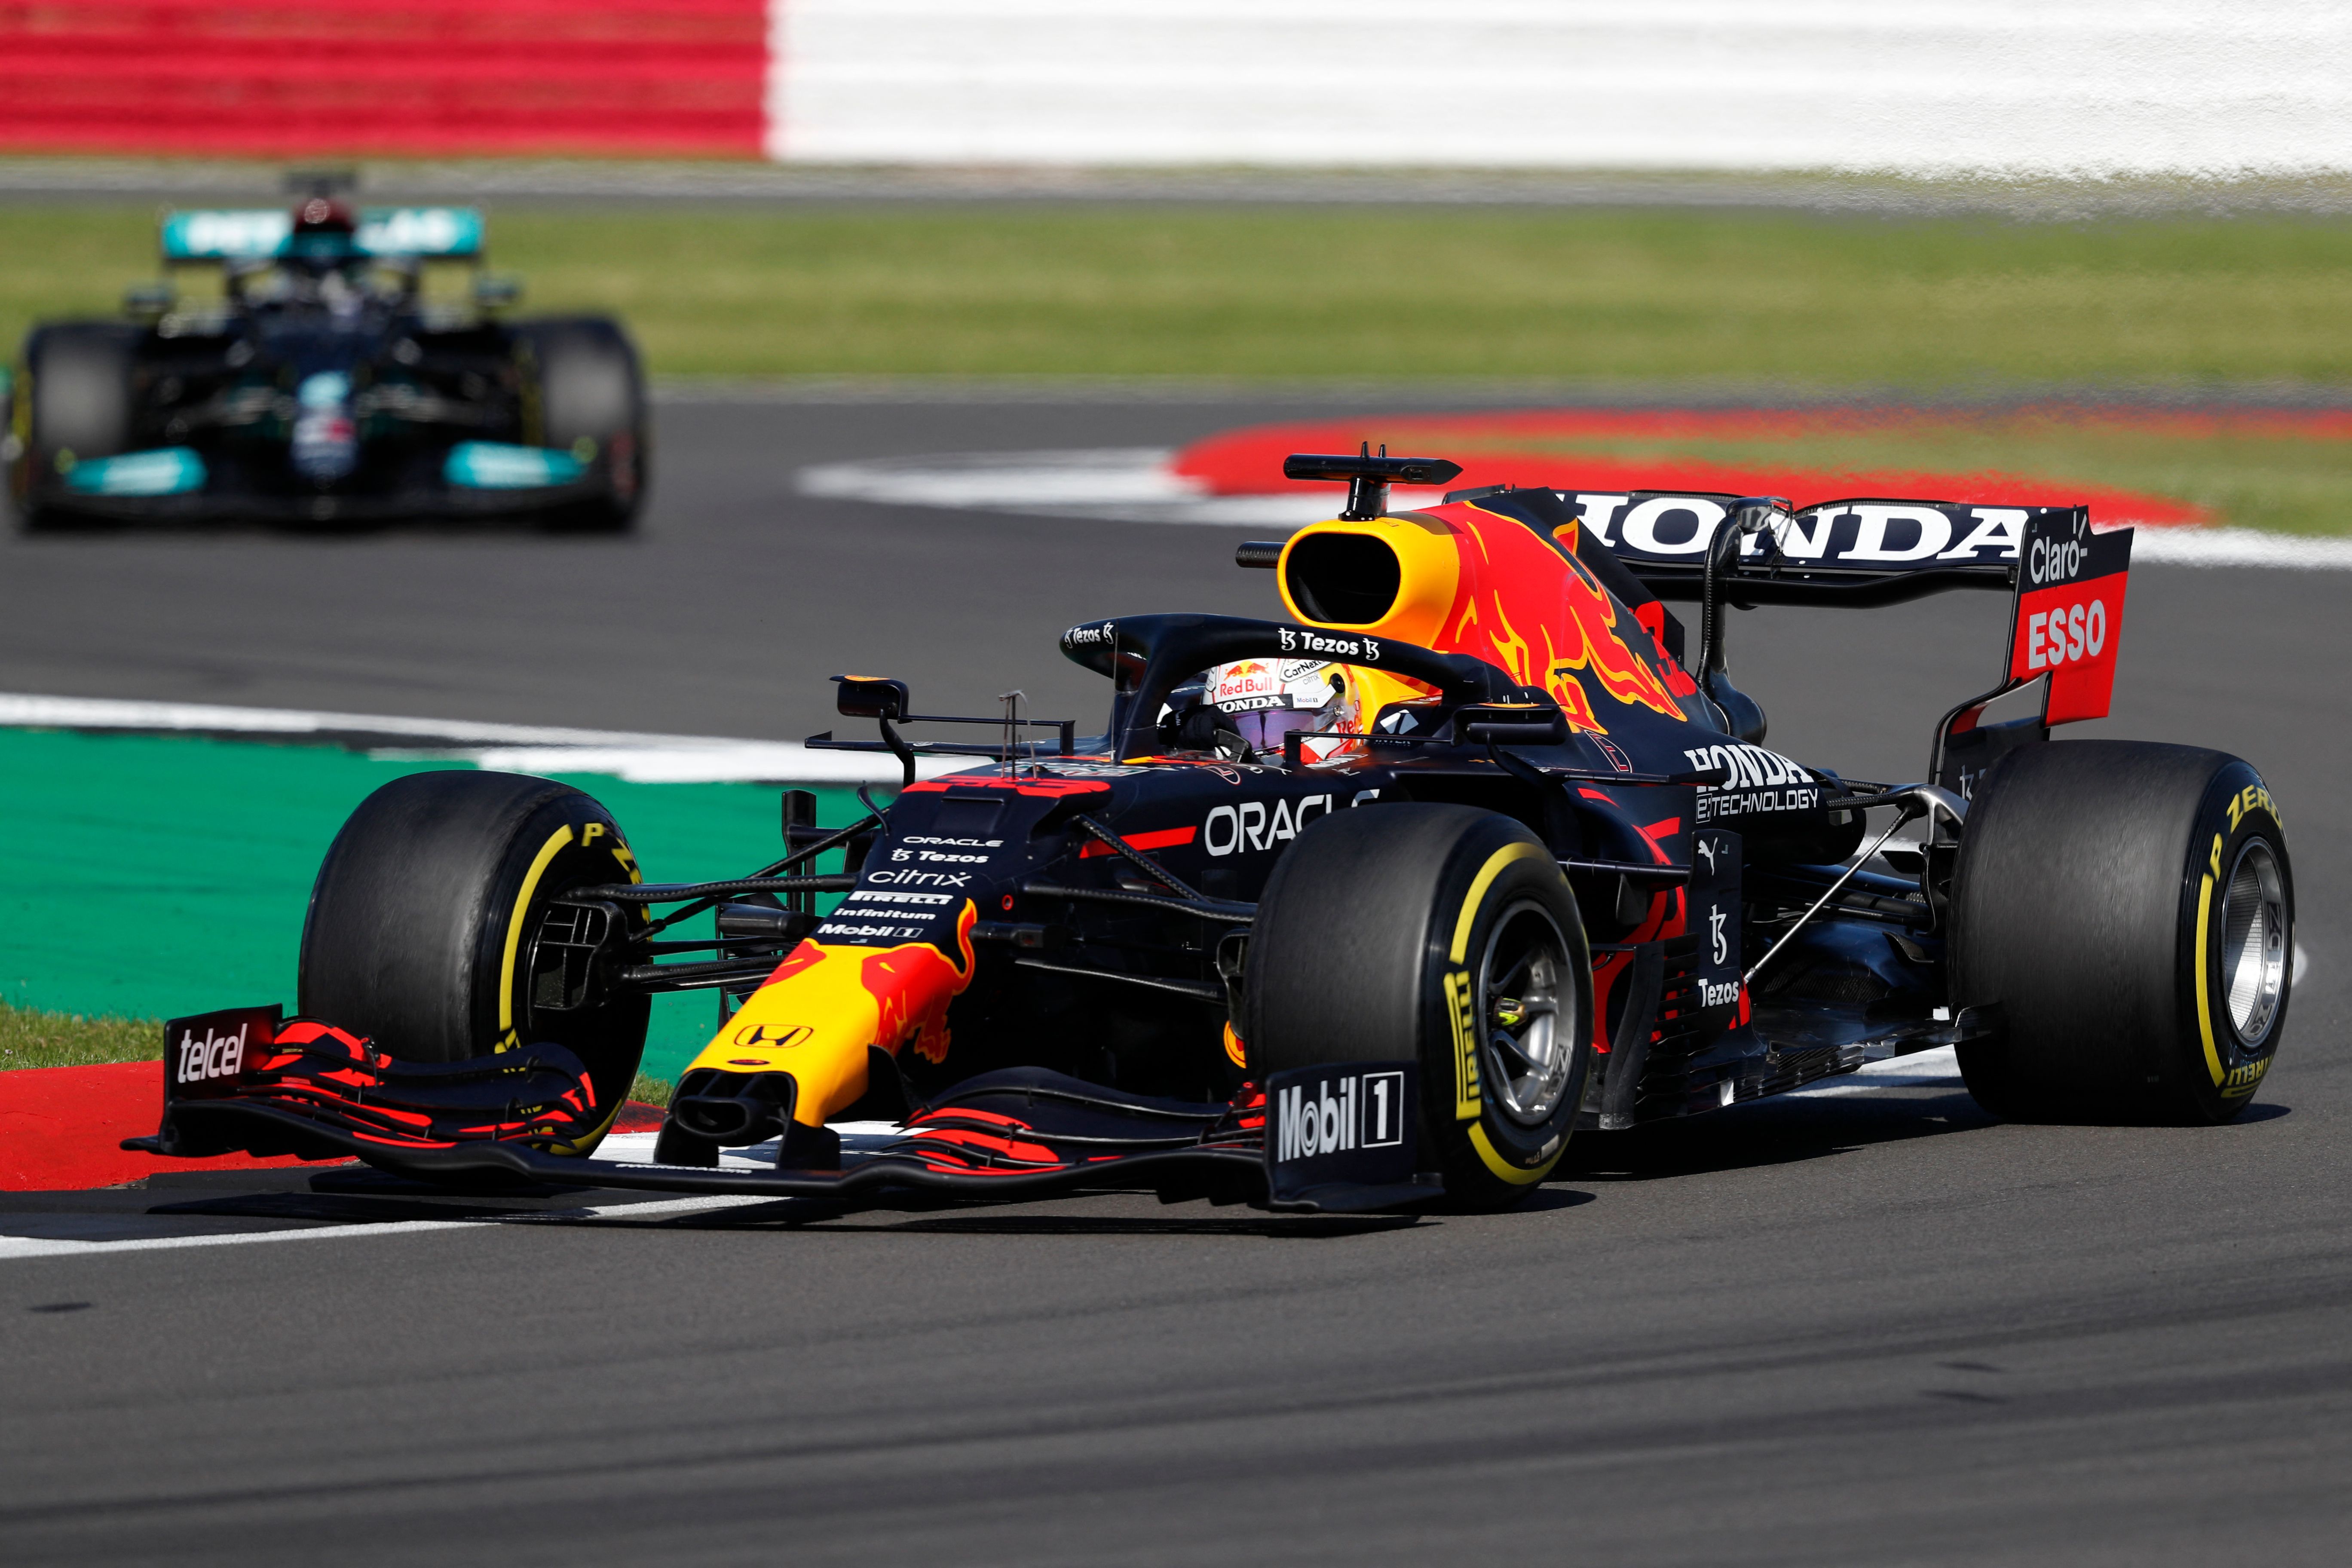 Max Verstappen Makes History Sprint Qualifying Triumph at Silverstone